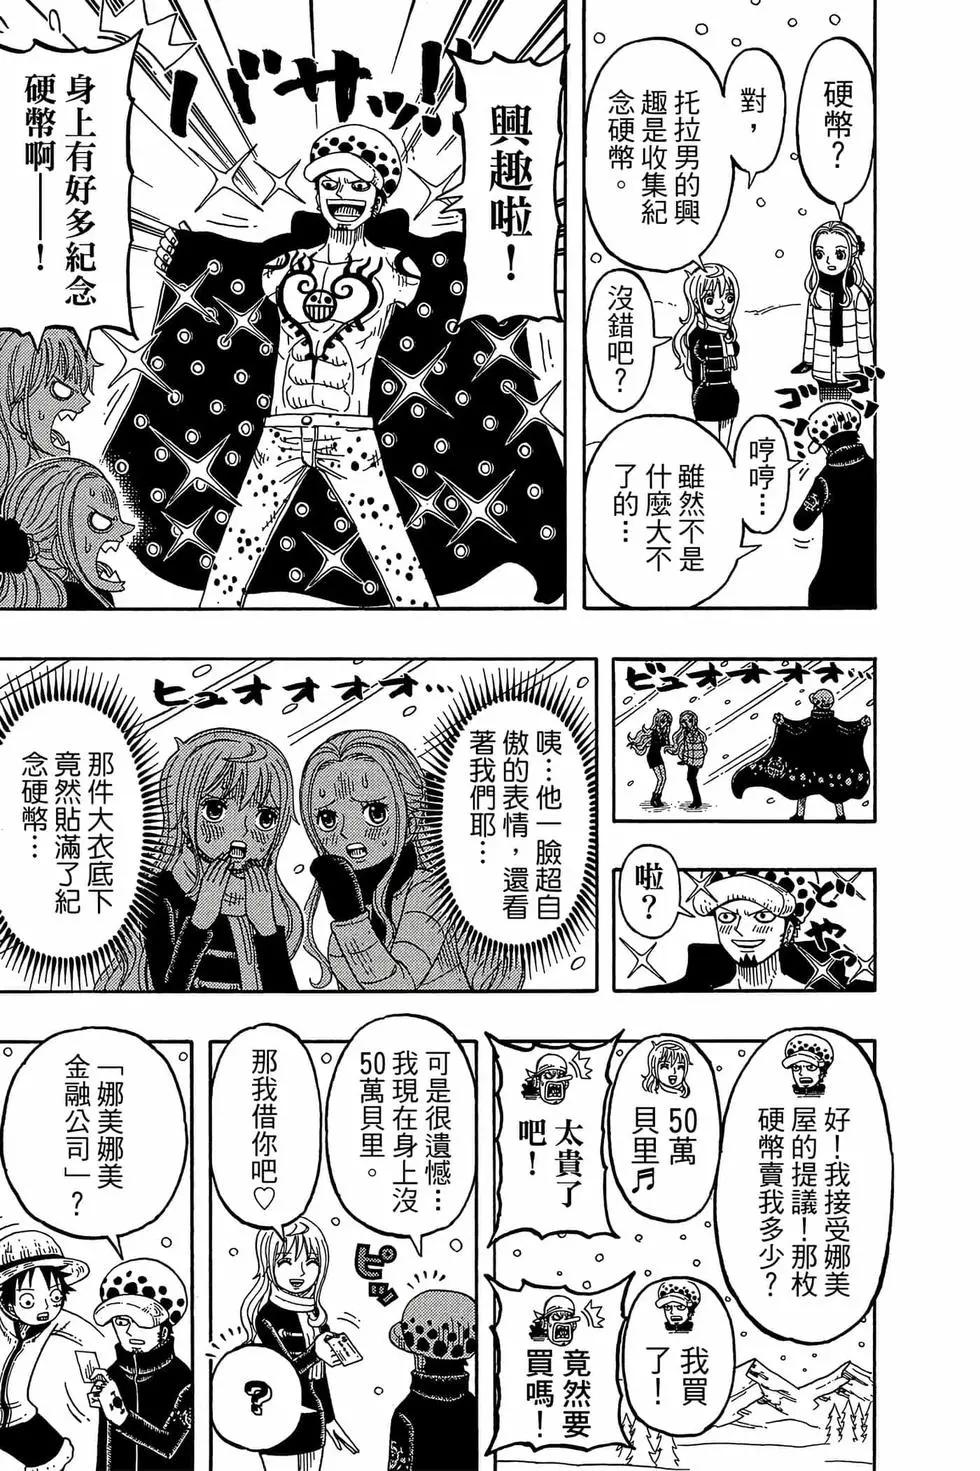 One piece party - 第03卷(1/4) - 6